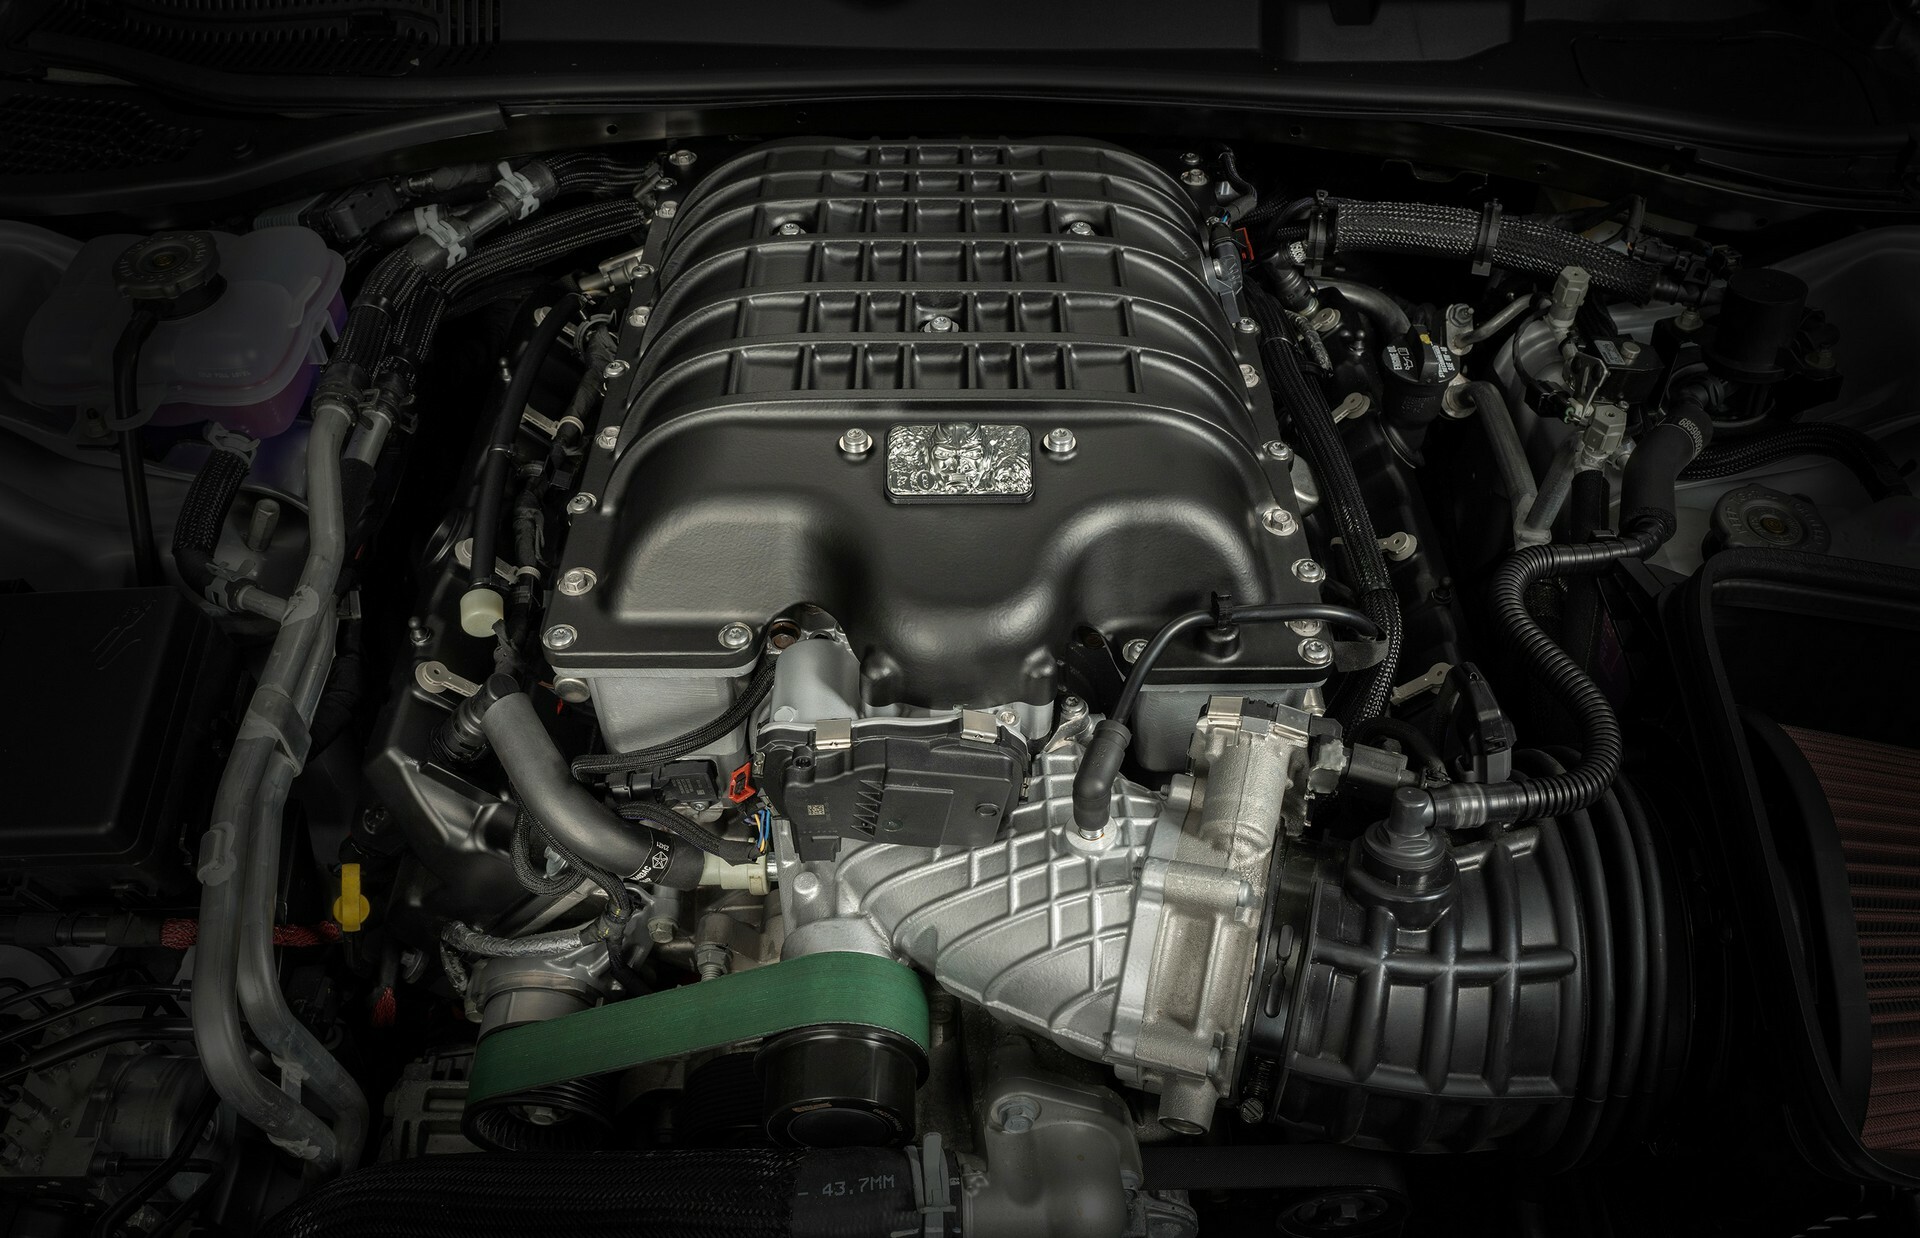 Dodge Introduces 1,025 HP Crate Engine Shared With The Challenger SRT